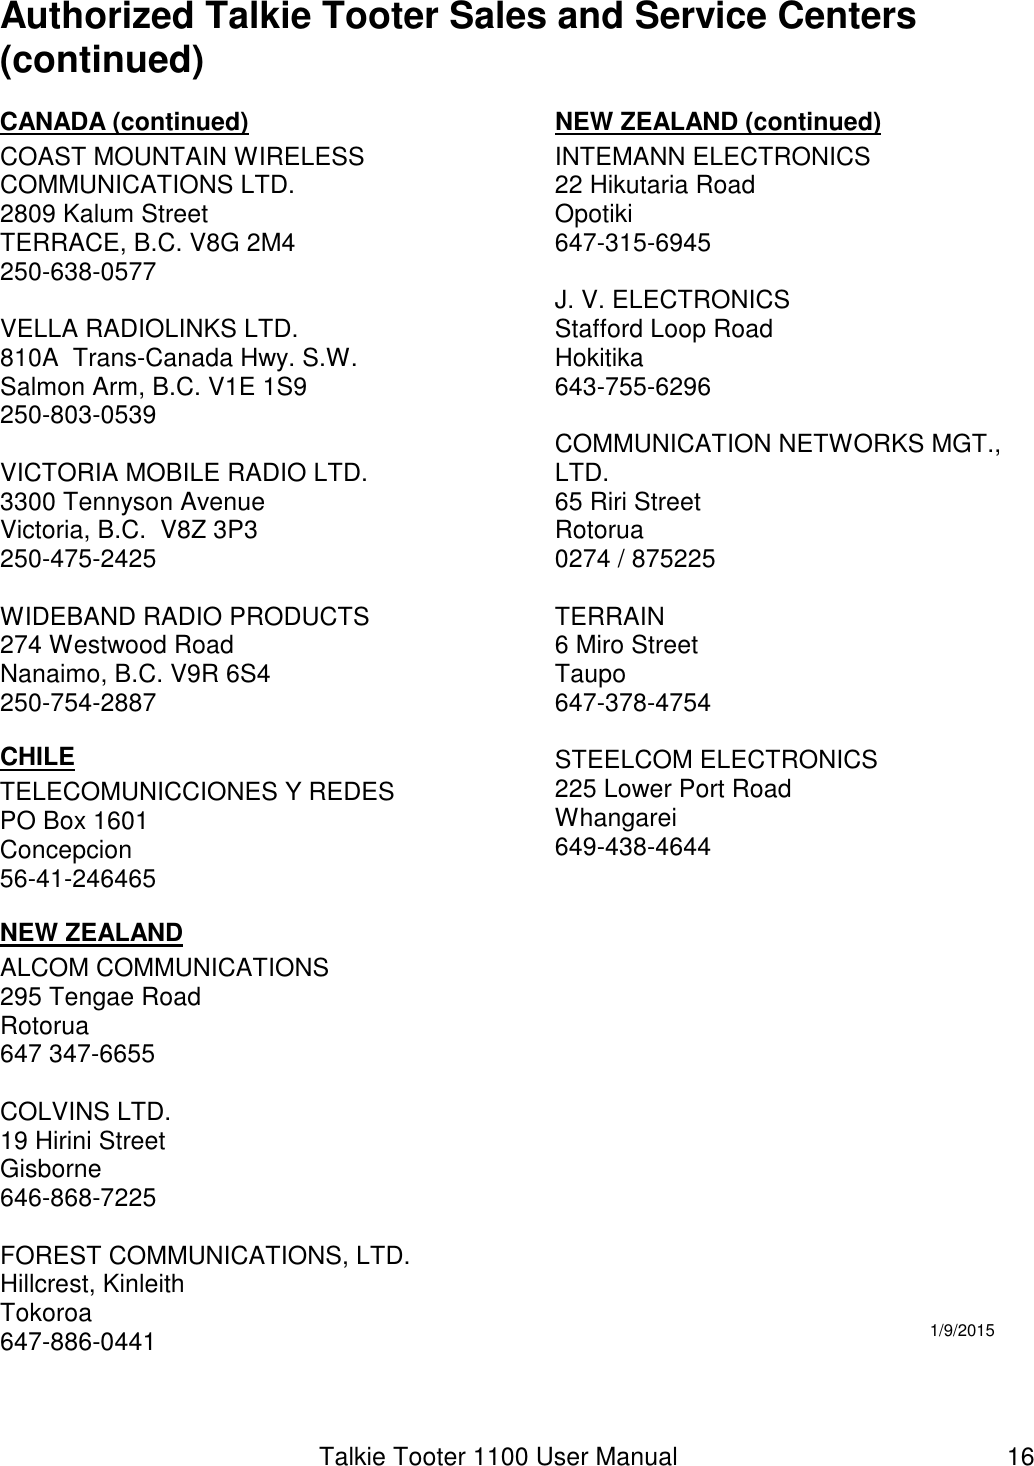 Talkie Tooter 1100 User Manual  16 Authorized Talkie Tooter Sales and Service Centers (continued)CANADA (continued) COAST MOUNTAIN WIRELESS COMMUNICATIONS LTD. 2809 Kalum Street TERRACE, B.C. V8G 2M4 250-638-0577  VELLA RADIOLINKS LTD. 810A  Trans-Canada Hwy. S.W. Salmon Arm, B.C. V1E 1S9 250-803-0539  VICTORIA MOBILE RADIO LTD. 3300 Tennyson Avenue Victoria, B.C.  V8Z 3P3 250-475-2425  WIDEBAND RADIO PRODUCTS 274 Westwood Road Nanaimo, B.C. V9R 6S4 250-754-2887 CHILE TELECOMUNICCIONES Y REDES PO Box 1601  Concepcion 56-41-246465 NEW ZEALAND ALCOM COMMUNICATIONS 295 Tengae Road Rotorua 647 347-6655  COLVINS LTD. 19 Hirini Street Gisborne 646-868-7225  FOREST COMMUNICATIONS, LTD. Hillcrest, Kinleith Tokoroa 647-886-0441  NEW ZEALAND (continued) INTEMANN ELECTRONICS 22 Hikutaria Road Opotiki 647-315-6945  J. V. ELECTRONICS Stafford Loop Road Hokitika 643-755-6296  COMMUNICATION NETWORKS MGT., LTD. 65 Riri Street Rotorua 0274 / 875225  TERRAIN 6 Miro Street Taupo 647-378-4754  STEELCOM ELECTRONICS 225 Lower Port Road Whangarei 649-438-4644                  1/9/2015 